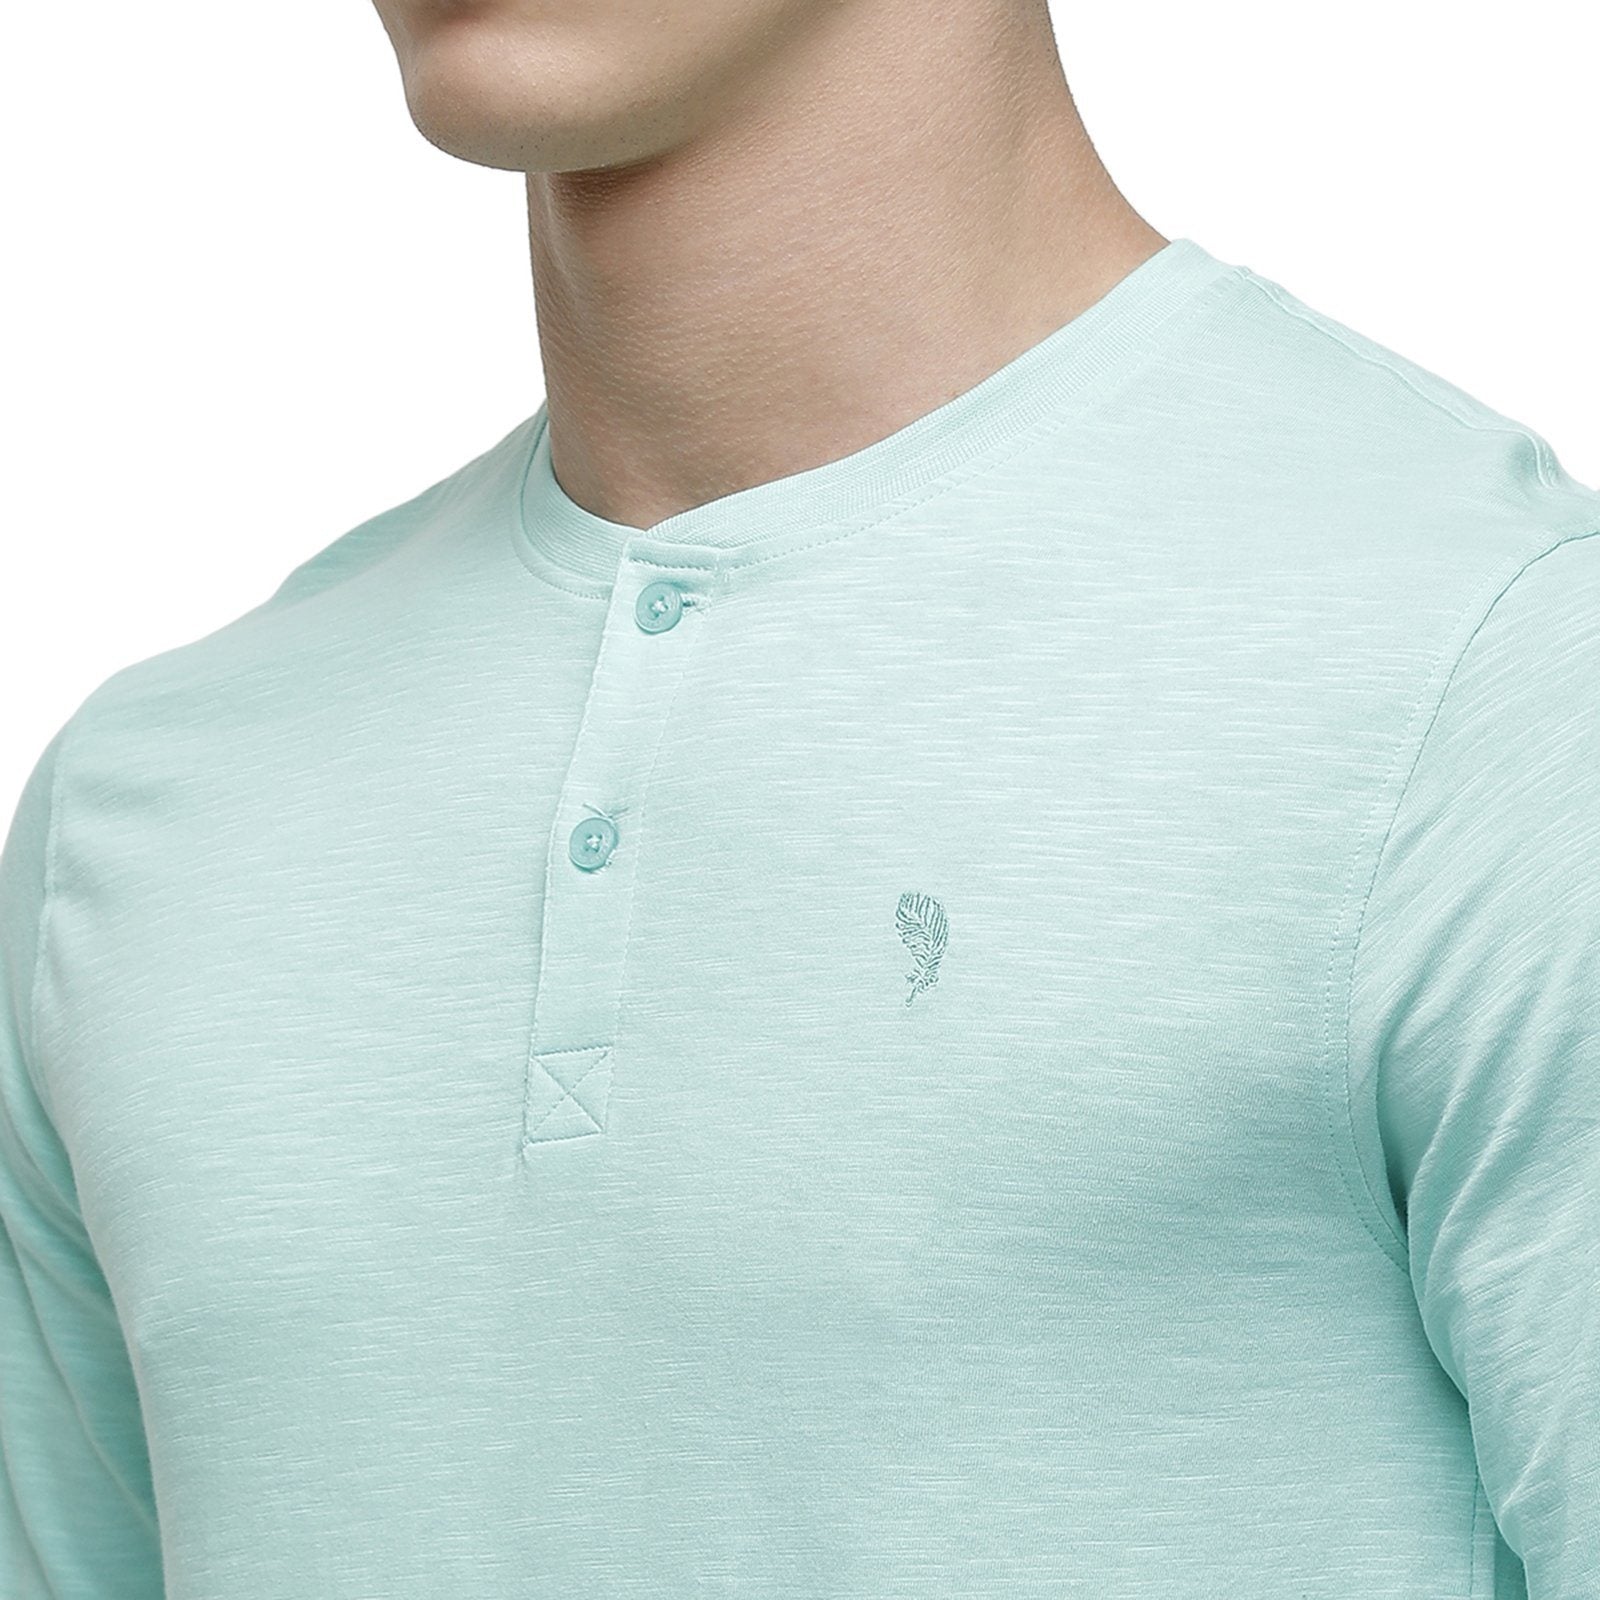 Classic polo Men's Turquoise Full Sleeve Slim Fit Henley Crew T-Shirt - Ozel- Lt. Grass T-shirt Classic Polo 